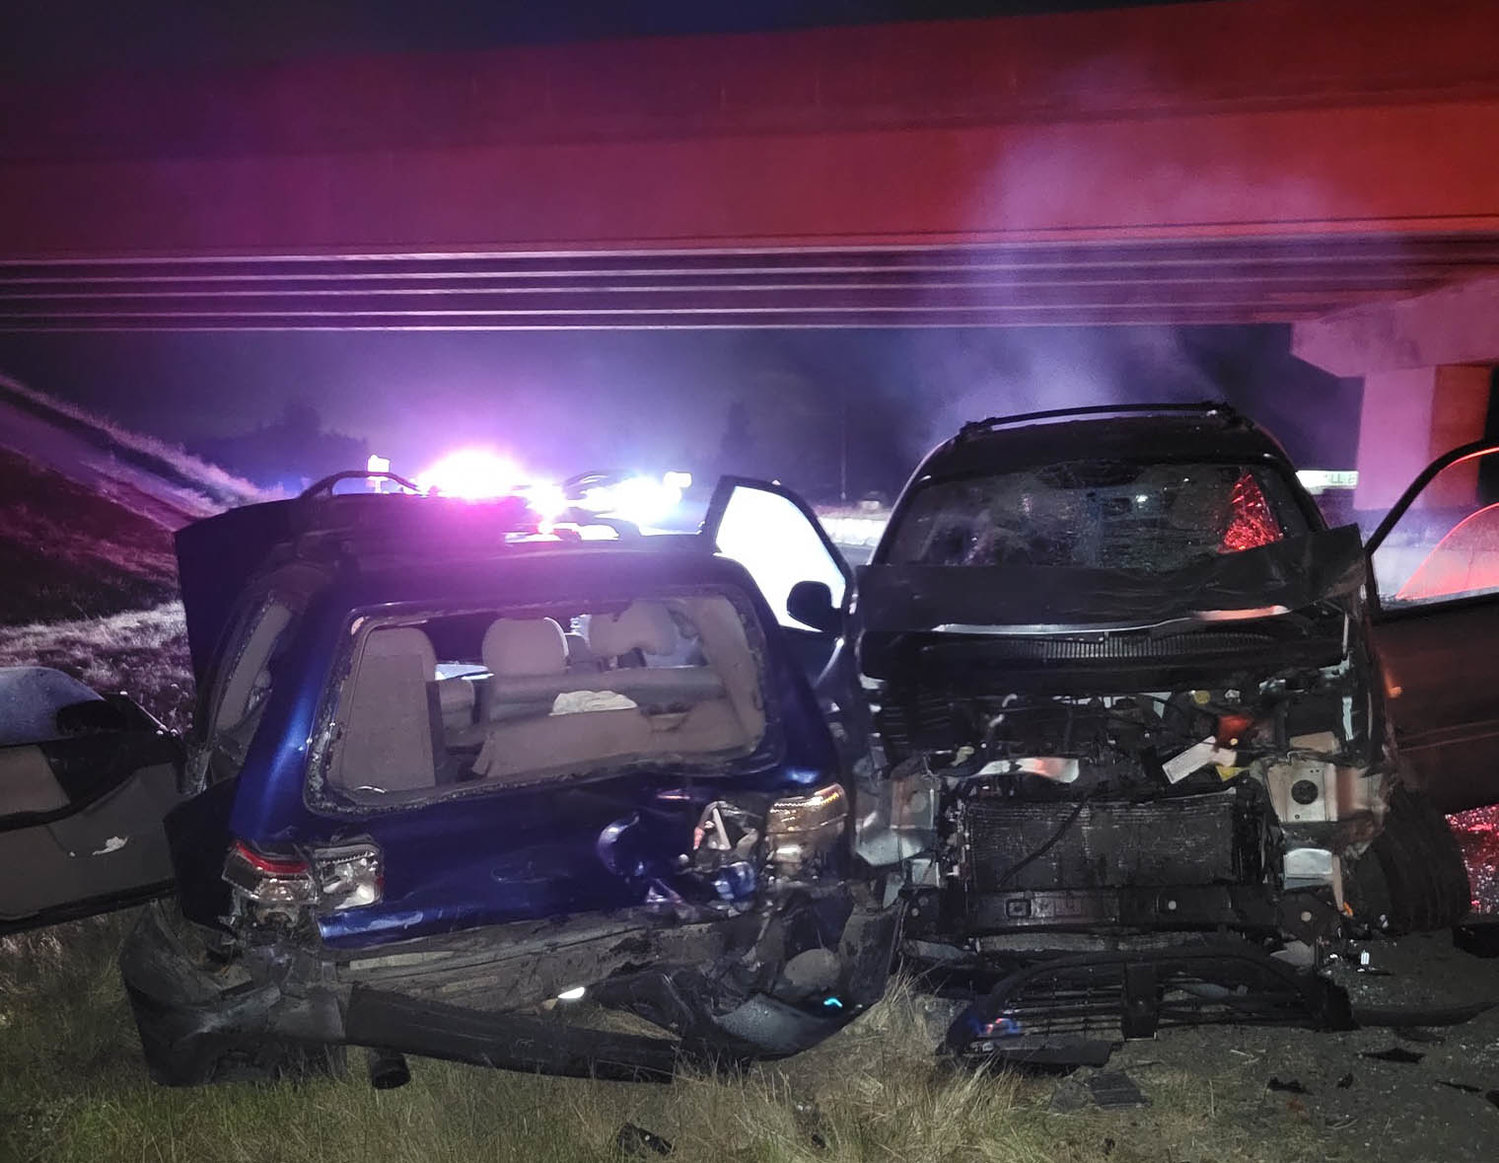 Two people were injured in a crash involving three vehicles on Interstate 5 near Napavine early Sunday morning, according to the Washington State Patrol. 